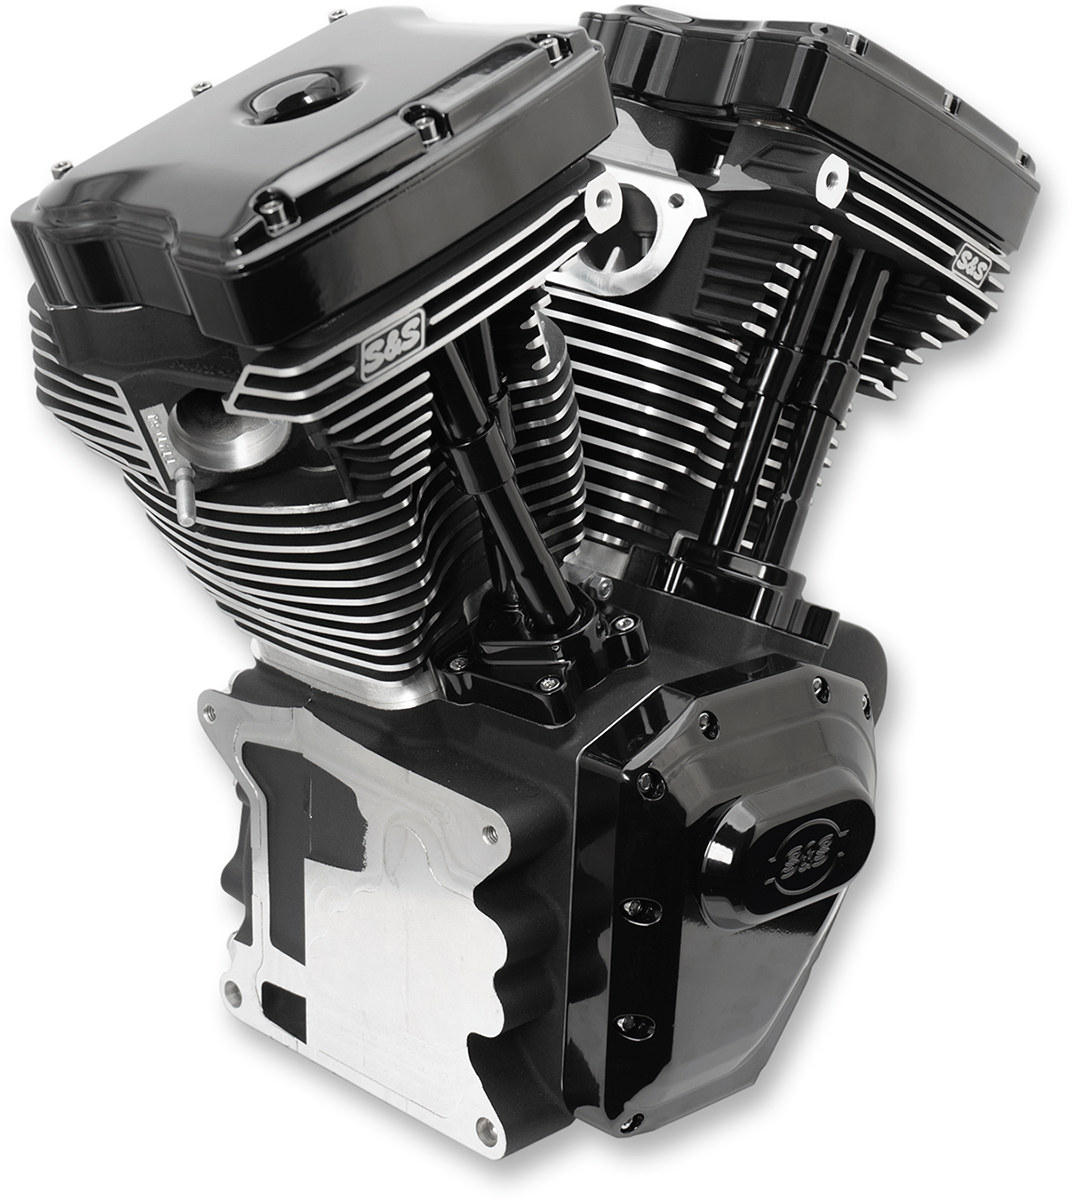 S&S CYCLES-T124 High Compression Long Block Twin Cam Engines / '99-'17 Big Twins-Engine-MetalCore Harley Supply